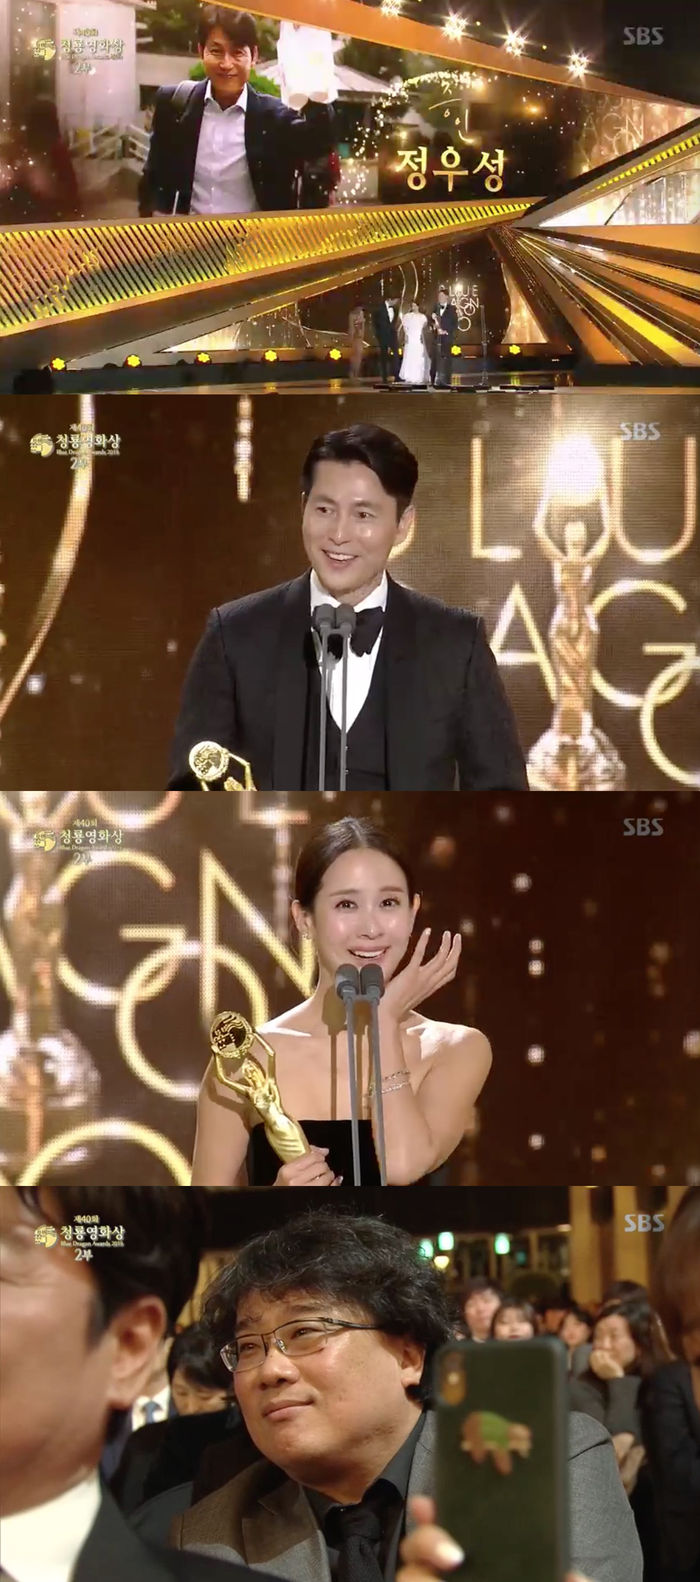 Cho Yeo-jeong and Jung Woo-sung were honored with their first lead award.On the afternoon of the 21st, The 40th Blue Dragon Film Award was held in Incheon Paradise City as an actor Kim Hye-soo and Hyun Suk.Jung Woo-sung, who won the Best Actor Award for the movie Witness, said, I thought I wanted to do this once as a joke that I thought parasites would receive it, but I did not know it would be true.He also added, In the back seat, Seol Kyung-gyu said that he would like you to receive the award today, but I am so grateful and trembling because the wind of Kyung-gyu became a reality.I participated in the Blue Dragon Award quite a lot, but I got the first prize. I did not plan and dream, so I got the prize.He also expressed his gratitude to his fellow actor Kim Hyang Ki and director.He said, I think a man who is watching this trophy in his hand at home on TV, and my friend Lee Jung-jae will be happy with him.The best actress was awarded by Cho Yeo-jeong of Parasites; Cho Yeo-jeong said, Thank you. I think I was the only one who didnt know the parasite would receive the best actress award.I did not really know that I would receive this category. When I did my work, I think the character that the actor likes personally and gets loved is different.But it was a great movie and I thought it was unrealistic because I received so much love. So I did not expect the awards of today. He also thanked the director and said, It was a character I always waited for. Cho Yeo-jeong said, At some point, I think I just accepted acting as an unrequited person.So I could be abandoned at any time, I could be abandoned at any time. I loved acting with this heart, and the love that I thought could not be done was my driving force.I will not think that love has been achieved because I received this award. And finally, Cho Yeo-jeong said, I will always walk silently, though it is always obvious.I will try my best to love my heart as well as now. He finished his testimony by reenacting a passage of the parasite.